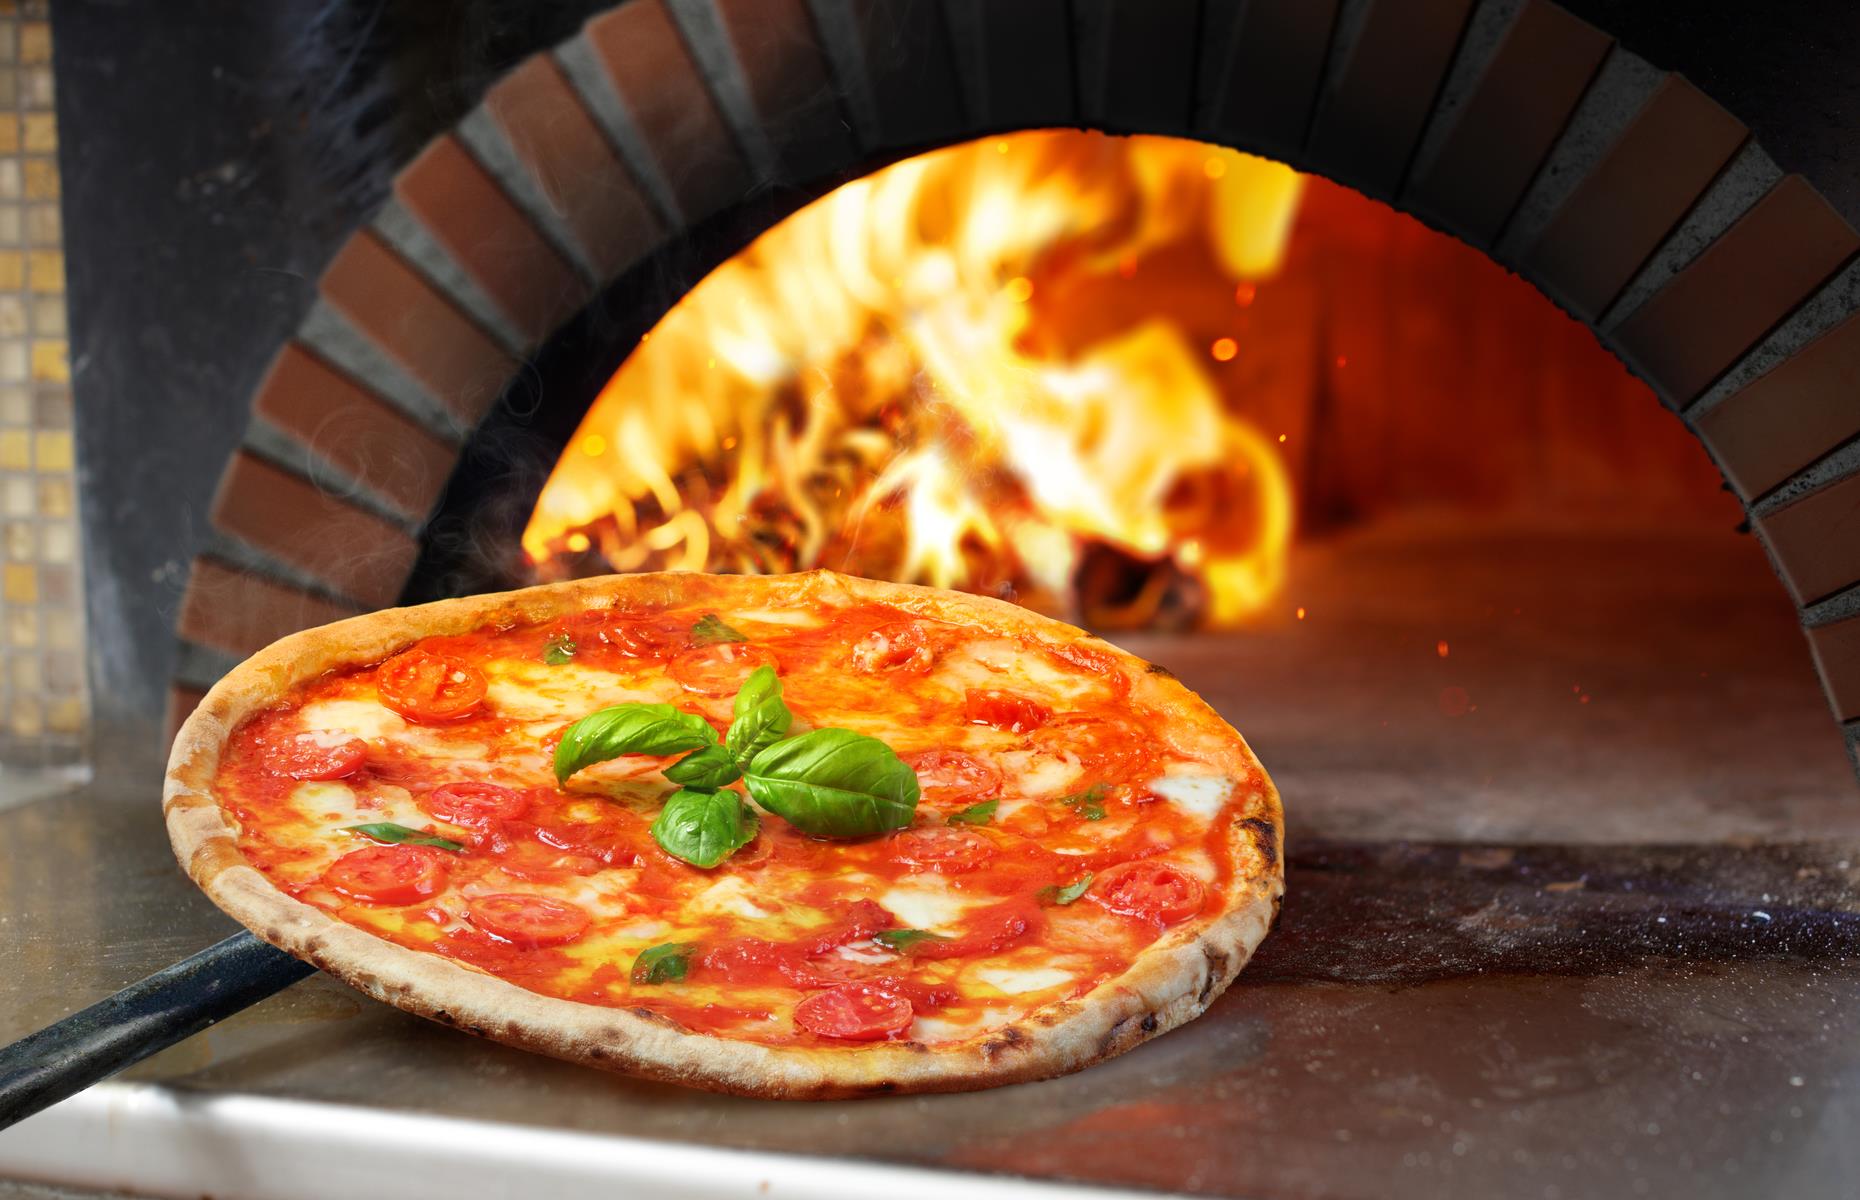 Most of us don't have the luxury of a pizza oven at home, so what's the best way to get that crisp base? The oven needs to be at its hottest and use a pre-heated baking stone, metal pizza dish, baking tray or cast iron pan. This almost replicates a pizza oven, ensuring the base sears quickly and is evenly crisp. Alternatively, start the pizza in a very hot cast iron pan on the hob, then pop it under the grill to brown the top.